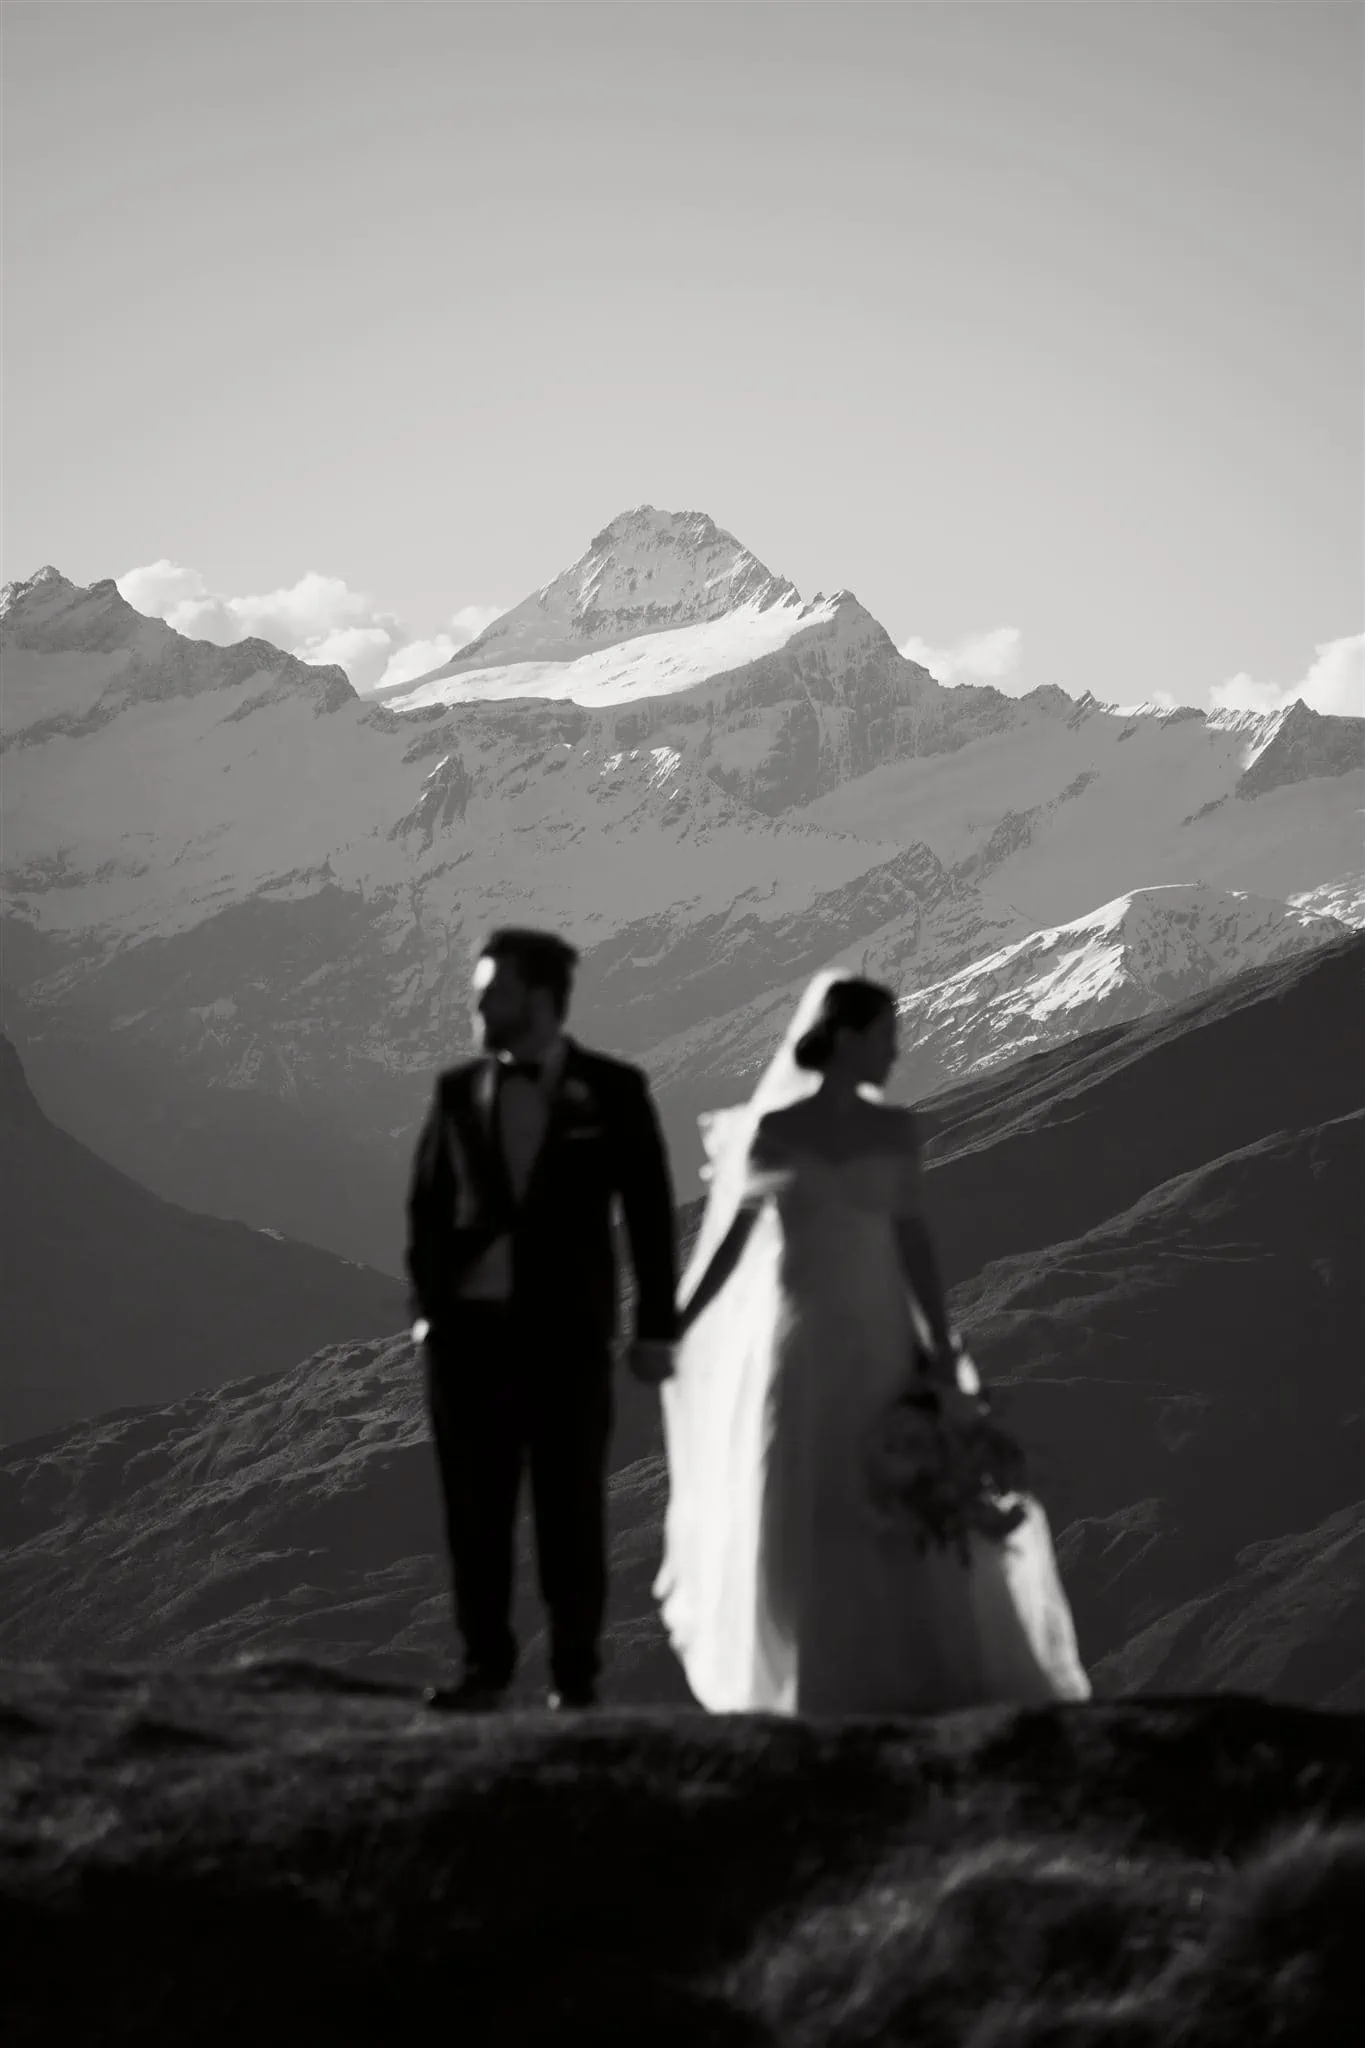 Queenstown New Zealand Elopement Wedding Photographer - A bride and groom enjoying a breathtaking queenstown heli-wedding package, standing on top of a hill with majestic mountains in the background.